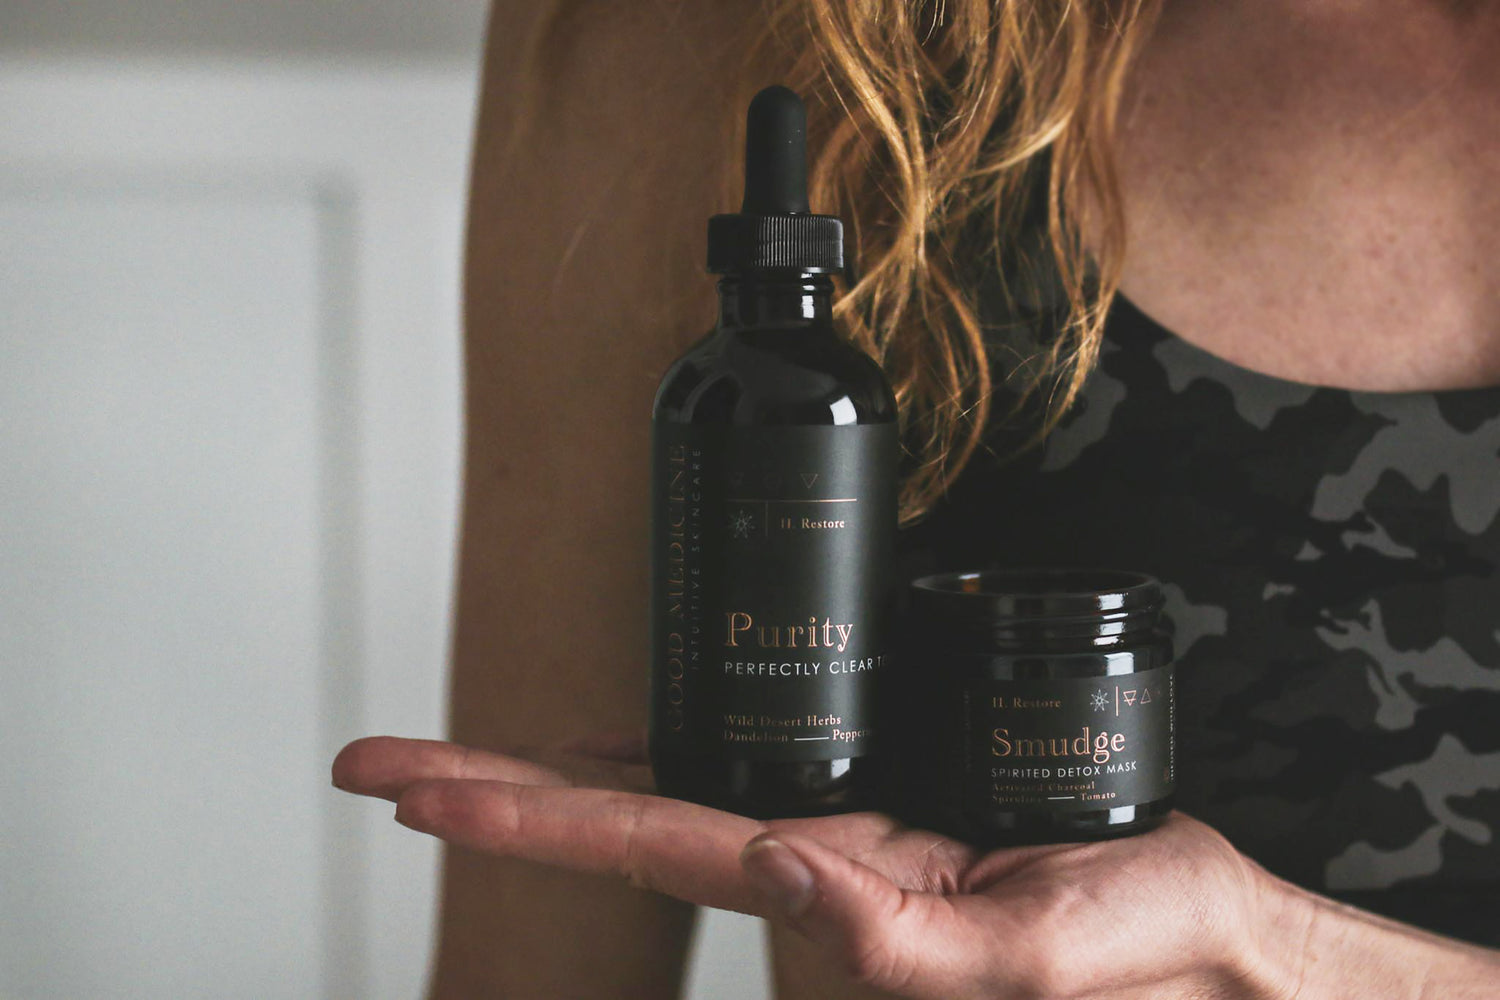 Armpit Detox with Purity + Smudge